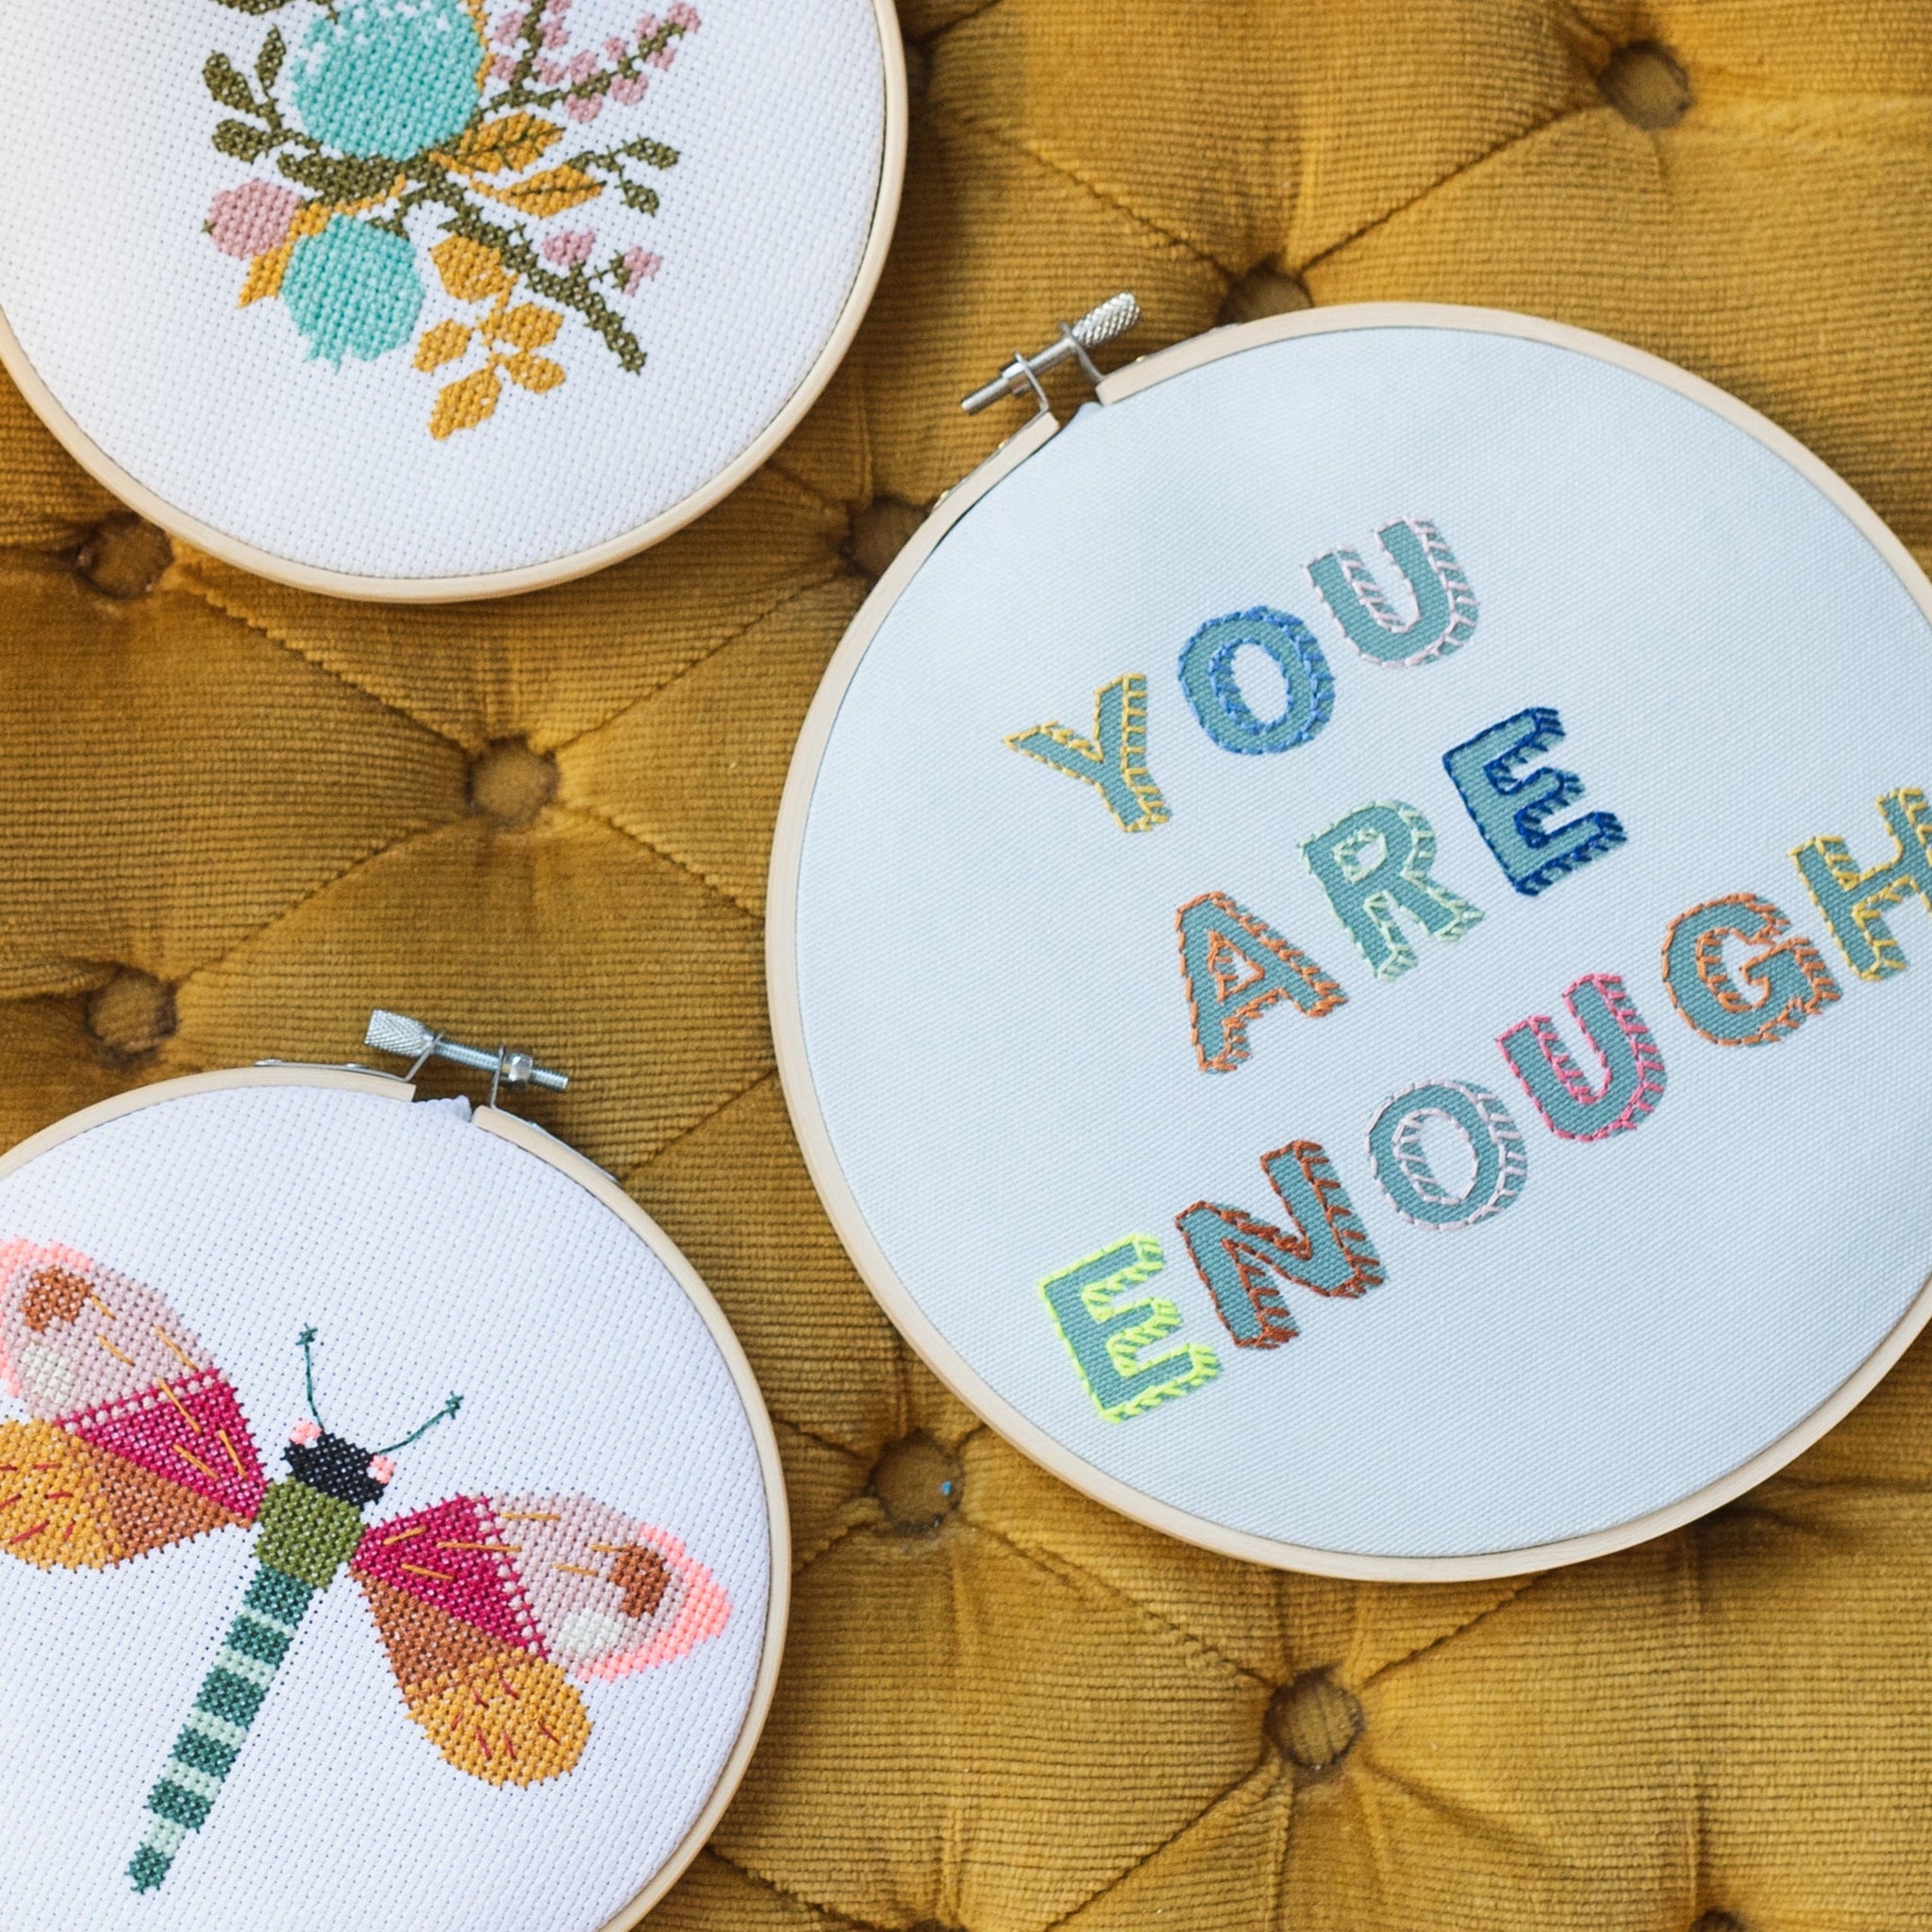 Free Embroidery Kit For Beginners - Help Each Other Grow - Cotton Clara